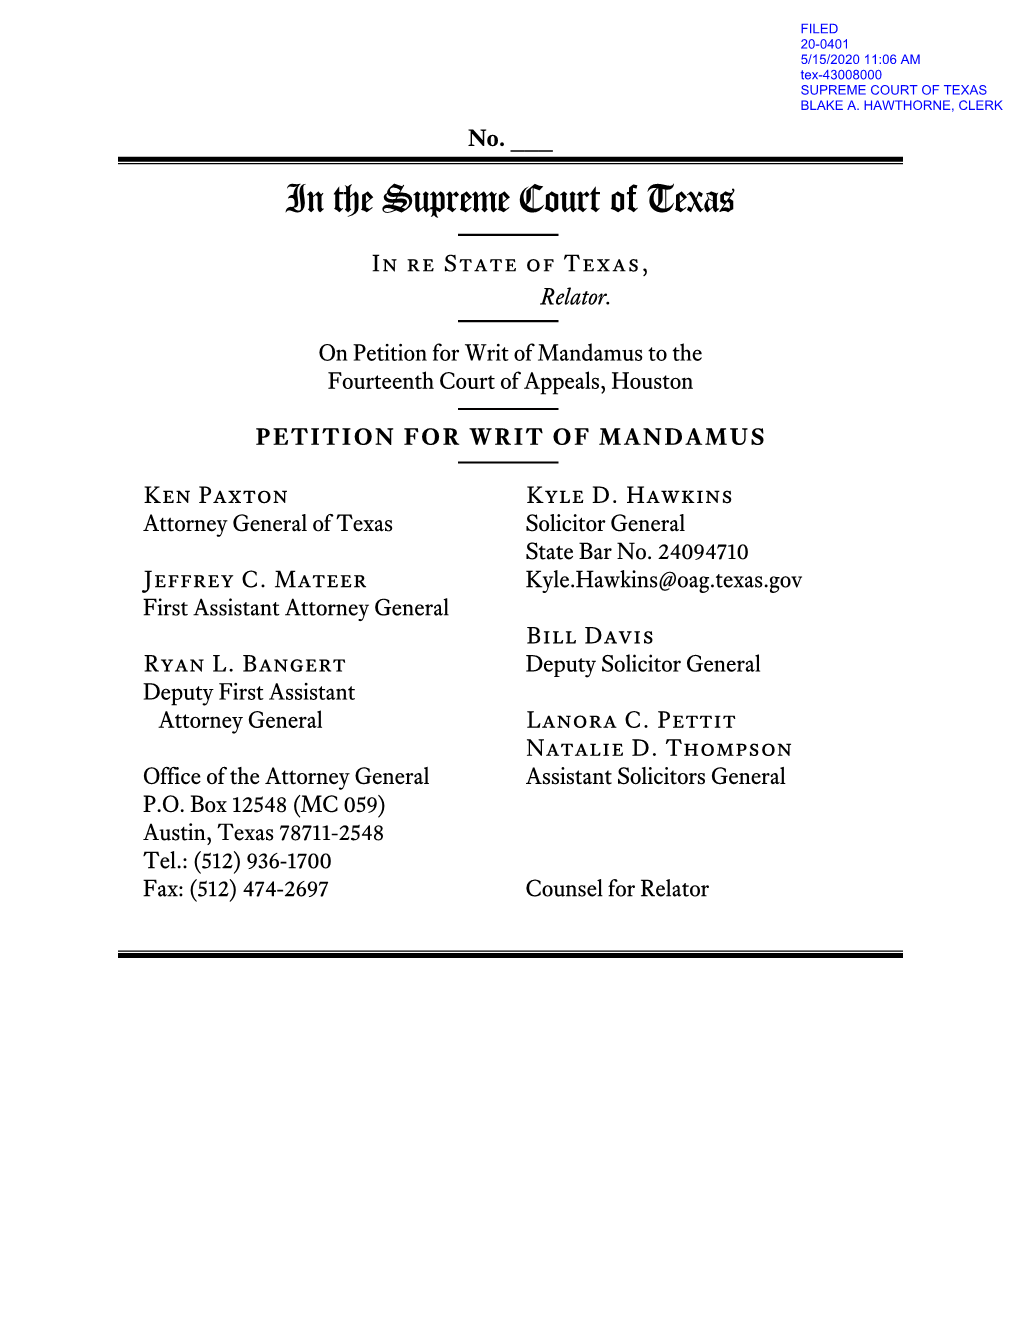 Petition for Writ of Mandamus to the Fourteenth Court of Appeals, Houston